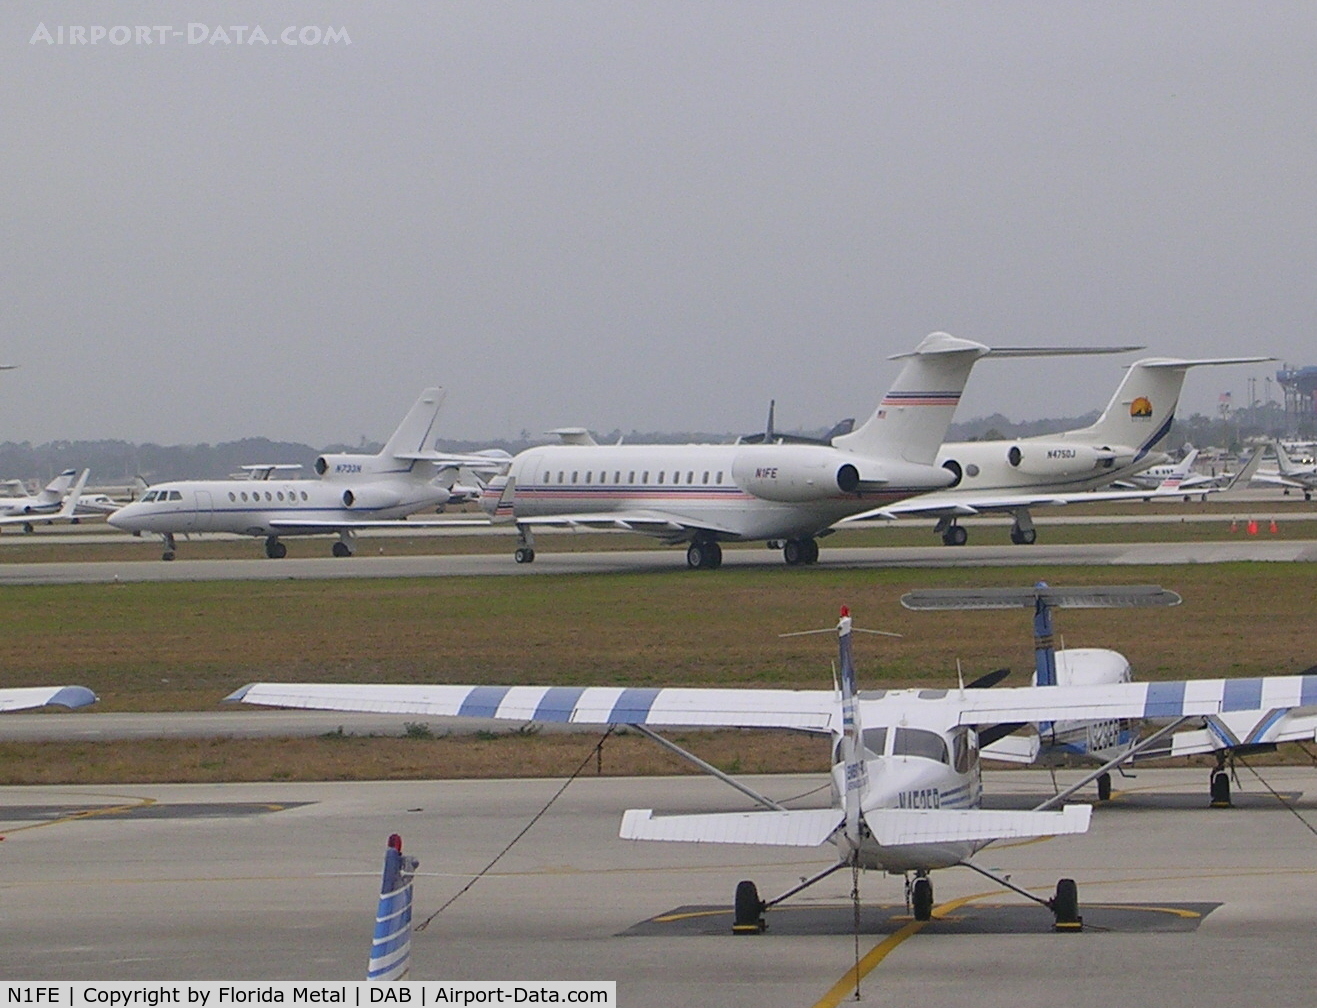 N1FE, 2001 Bombardier BD-700-1A10 Global Express C/N 9091, Global Express parked on 16/34 during race.